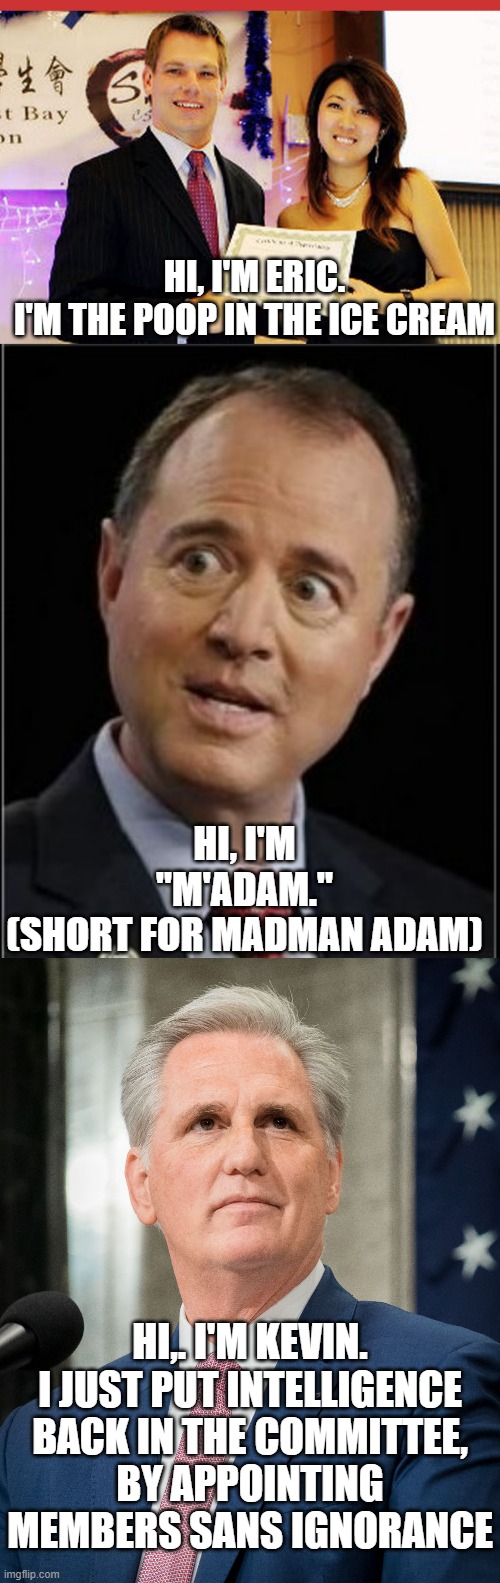 Working the Swing SchifT |  HI, I'M ERIC.
I'M THE POOP IN THE ICE CREAM; HI, I'M
 "M'ADAM." 
(SHORT FOR MADMAN ADAM); HI,. I'M KEVIN.
I JUST PUT INTELLIGENCE BACK IN THE COMMITTEE,
BY APPOINTING MEMBERS SANS IGNORANCE | image tagged in eric swalwell and fang,adam schiff,kevin mcarthy,nancy pelosi,the struggle,cultural marxism | made w/ Imgflip meme maker